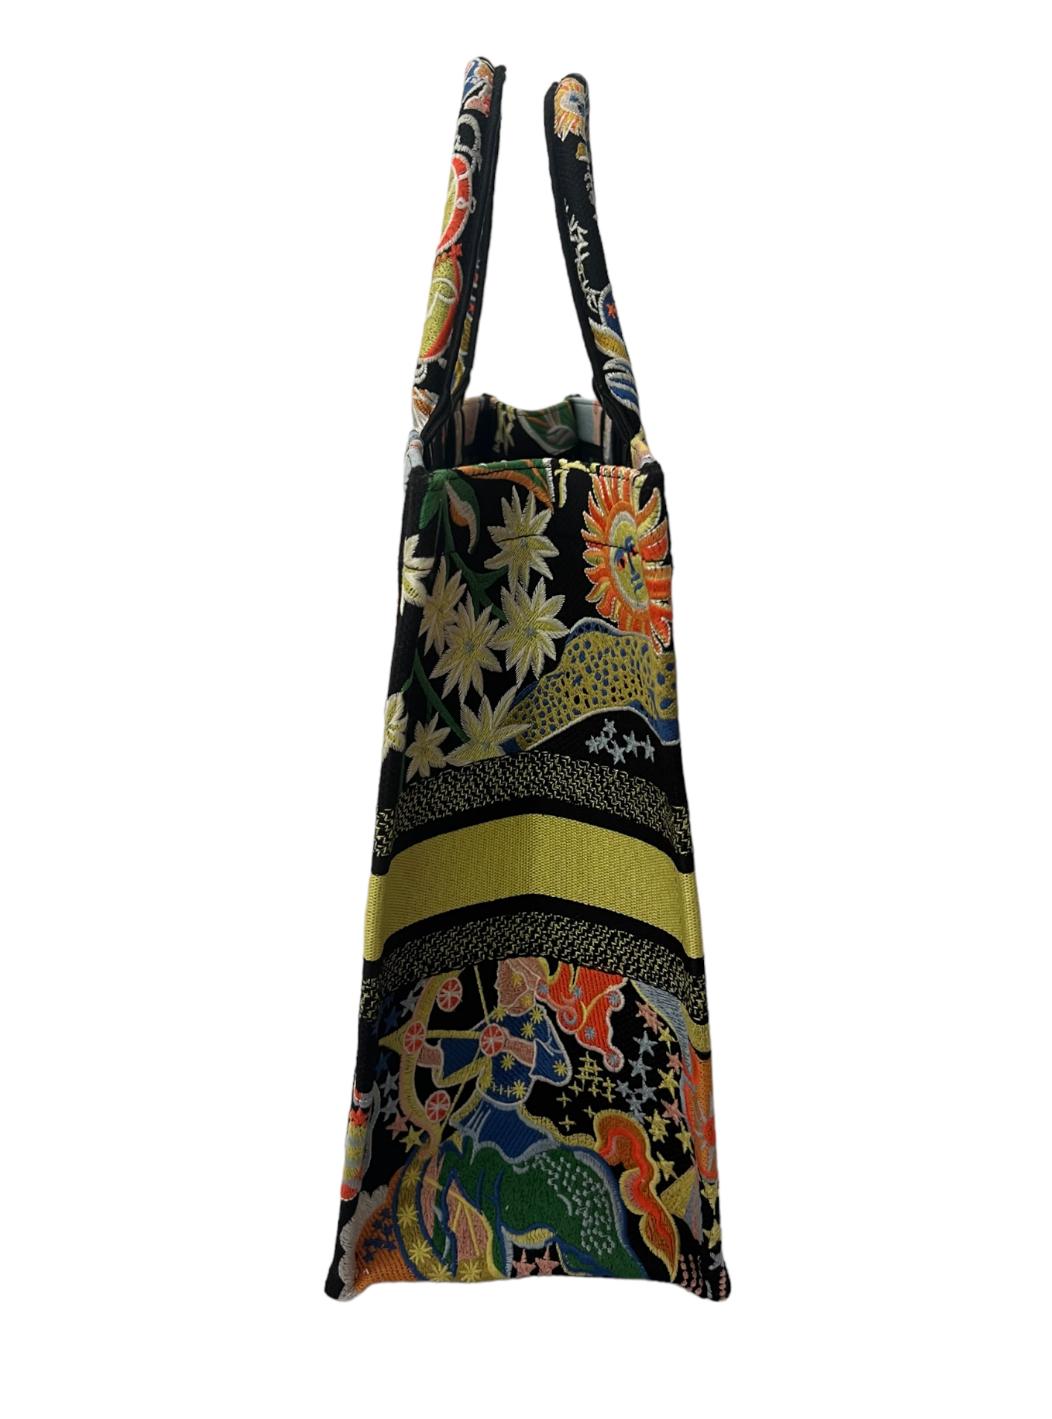 - Multicolored canvas
- Embroidered with zodiac & astrological motif 
- Front Christian Dior Paris signature
- Handles drop 6.25 inches 
- Includes diastolic bag
- Made in Italy